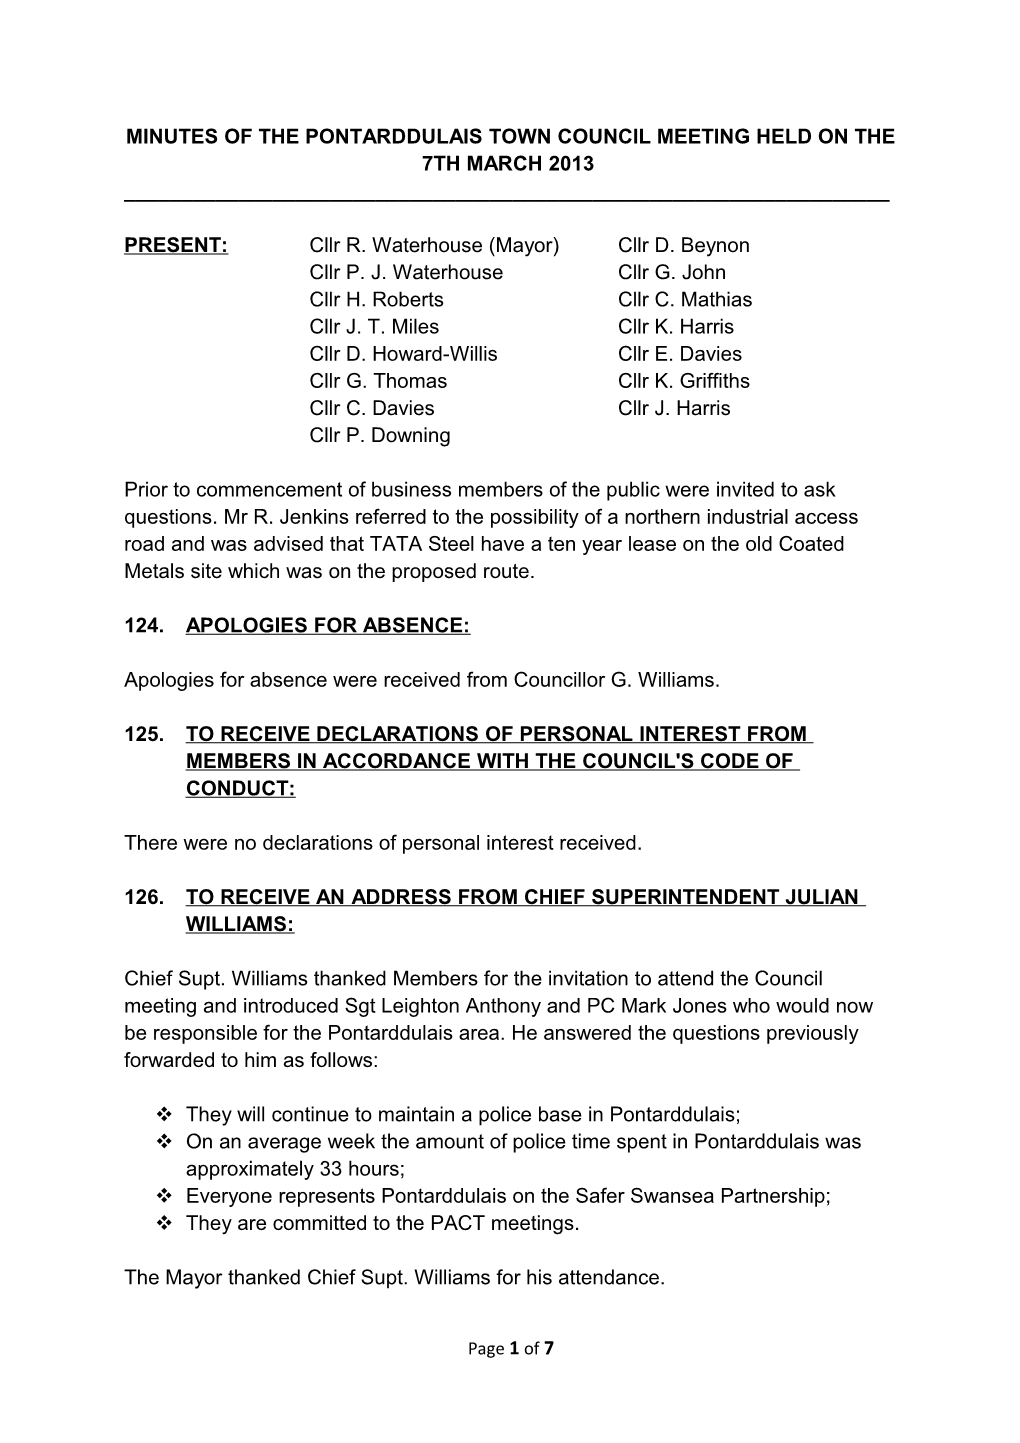 Minutes of the Pontarddulais Town Council Meeting Held on the 7Th March 2013